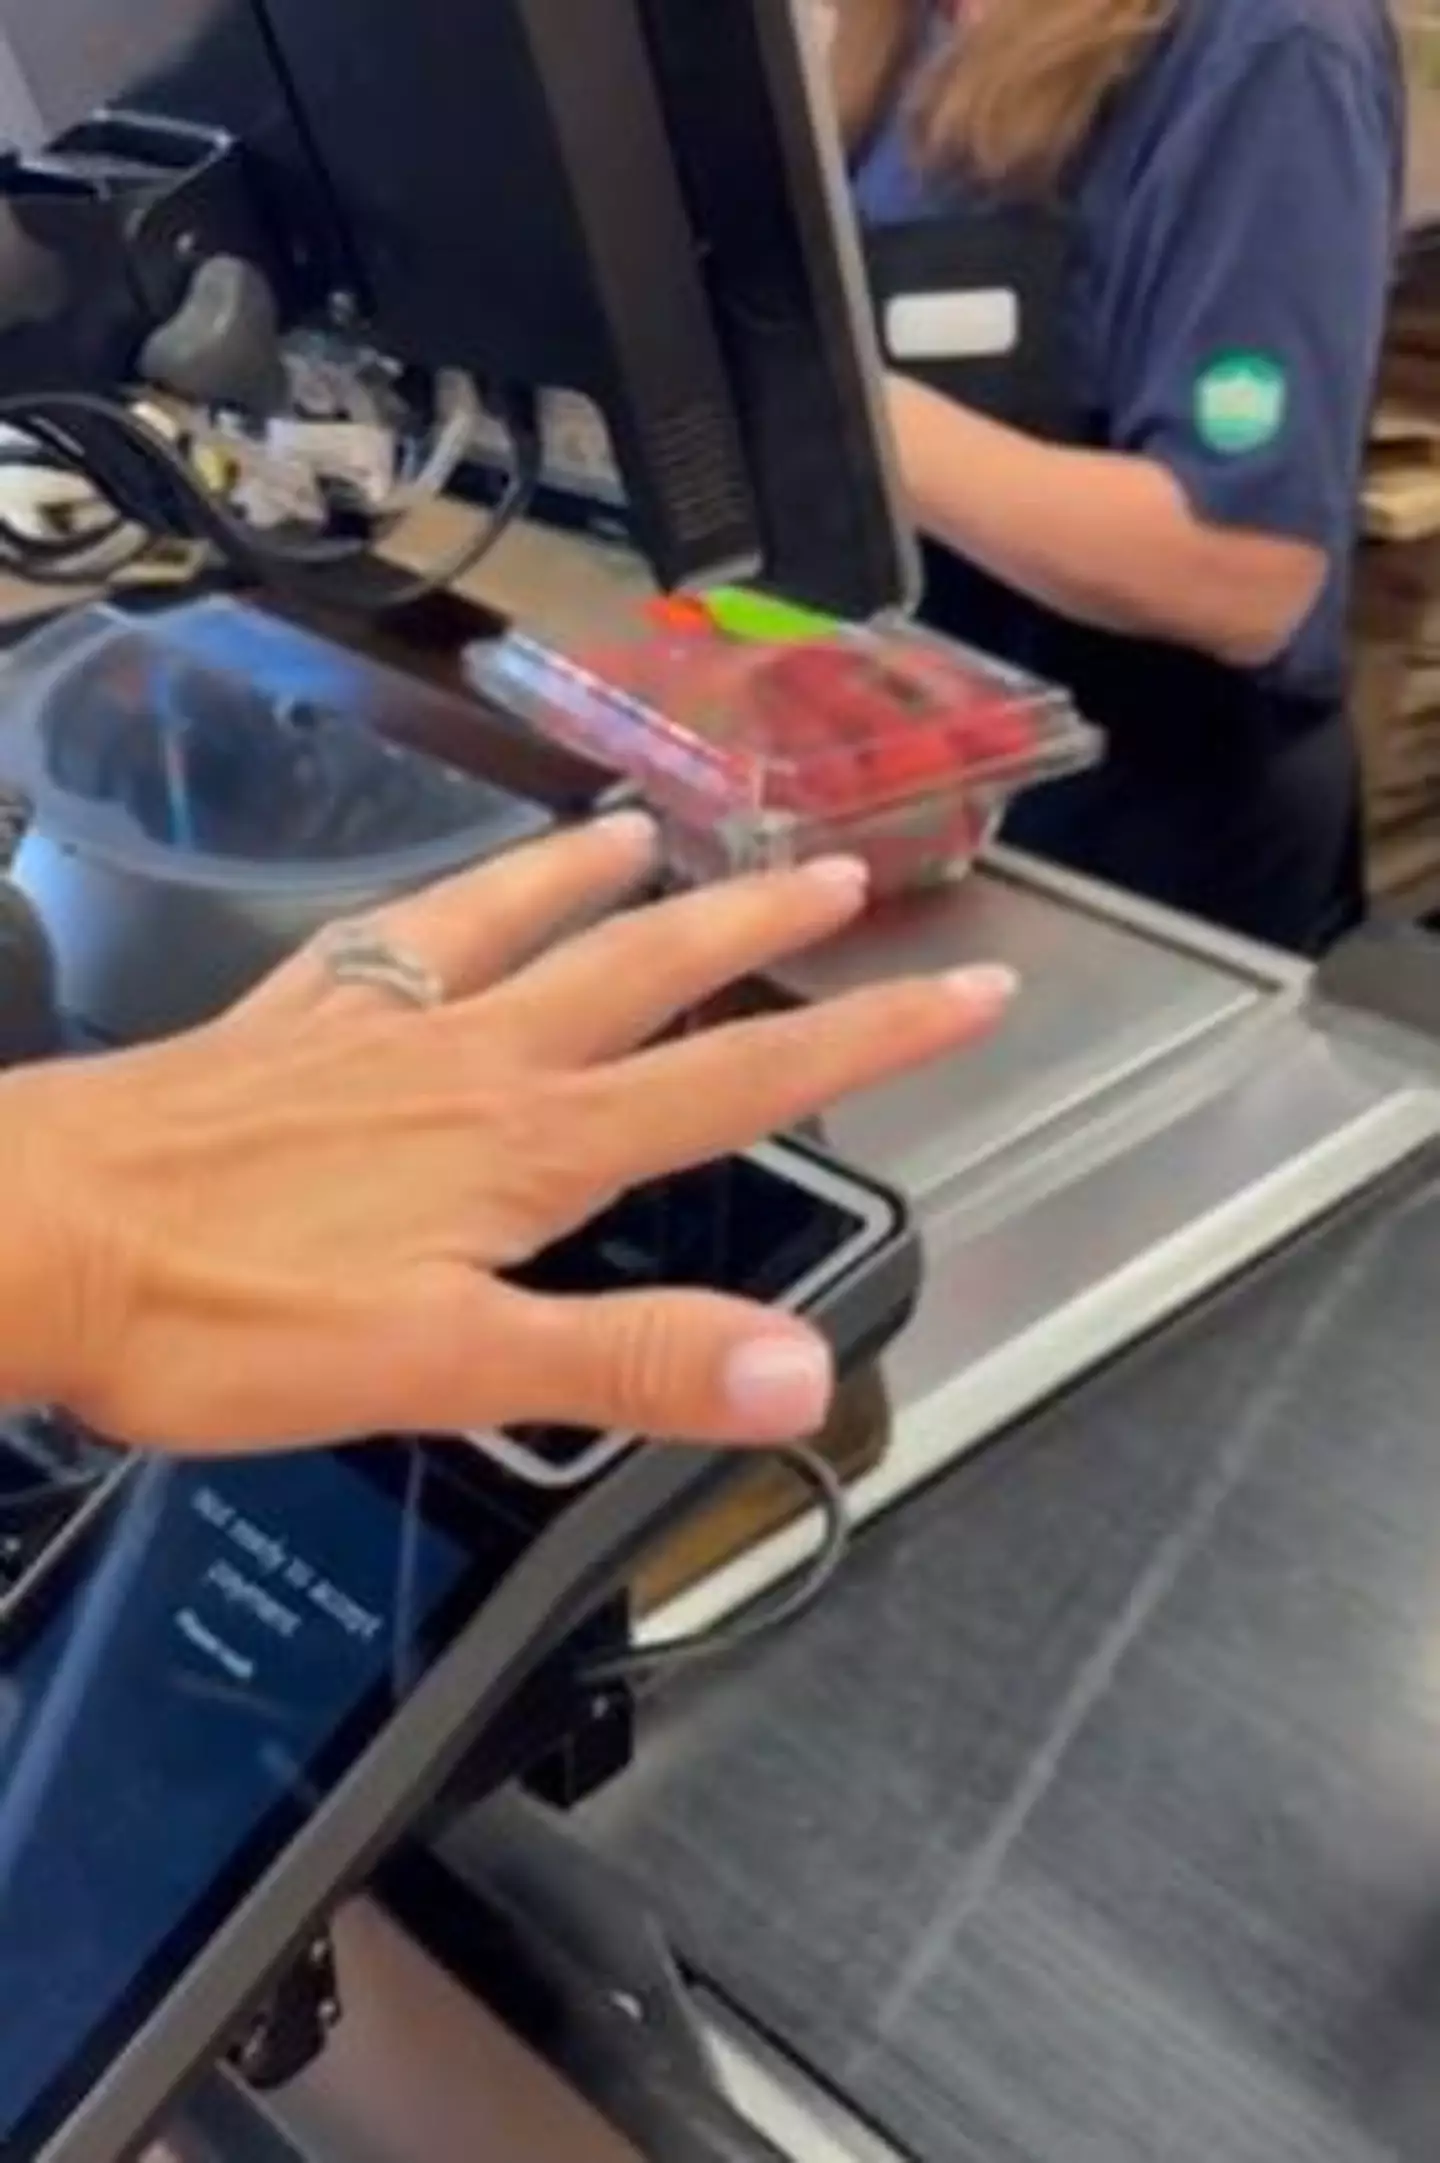 The palm reading technology is now available at Whole Foods in Phoenix, Arizona.